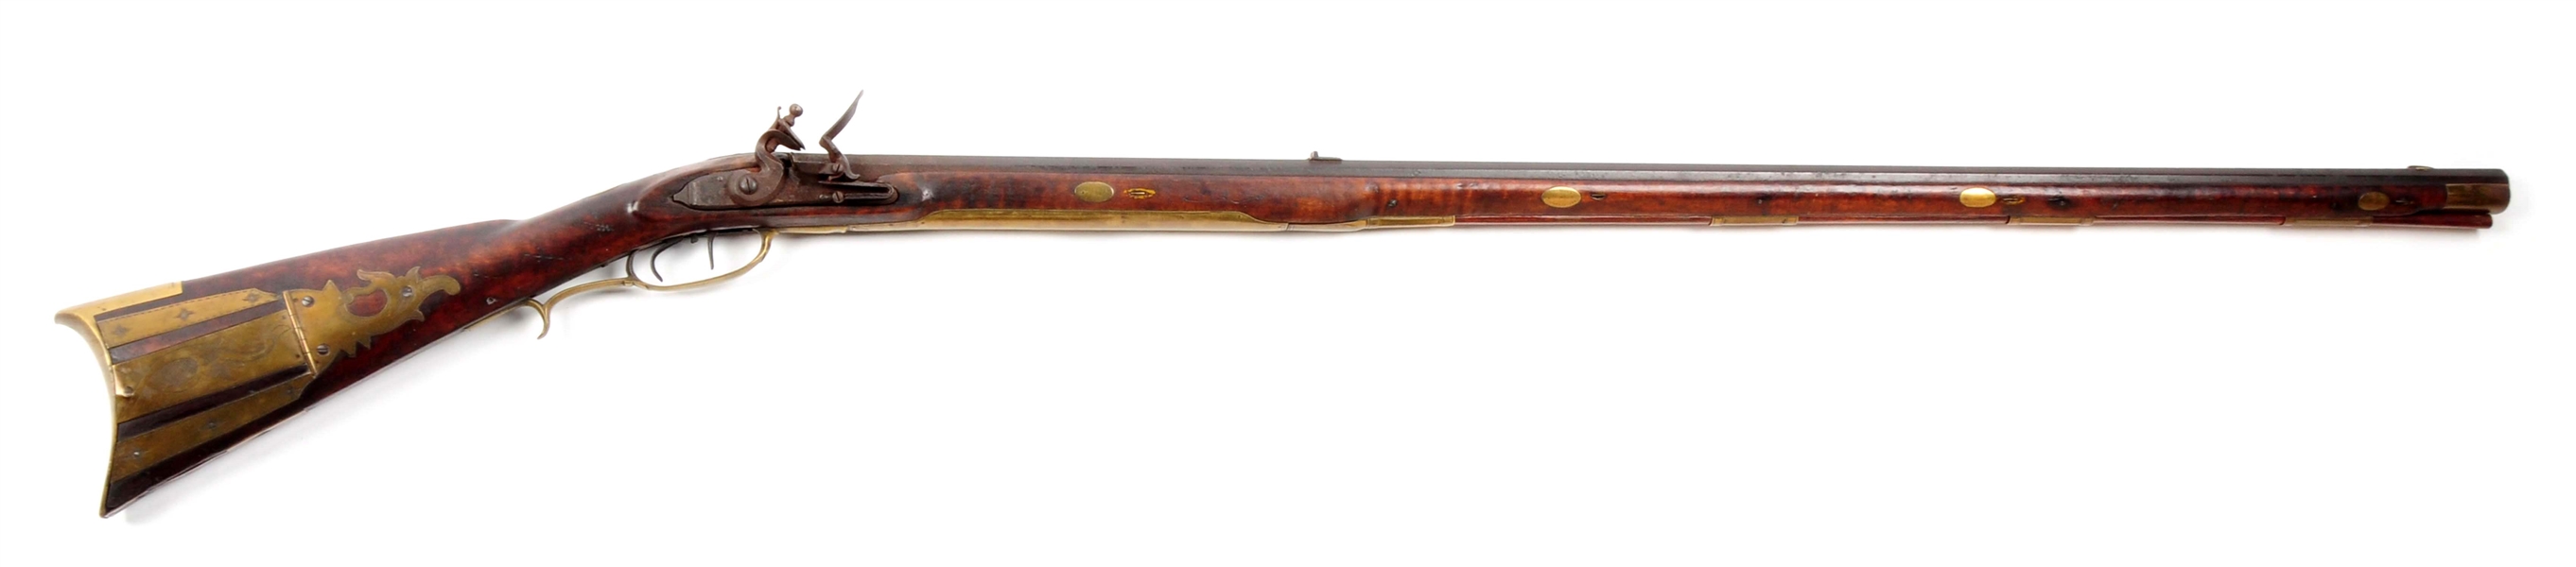 (A) CARVED ADAMS COUNTY FLINTLOCK RIFLE SIGNED JOHN MEALS.